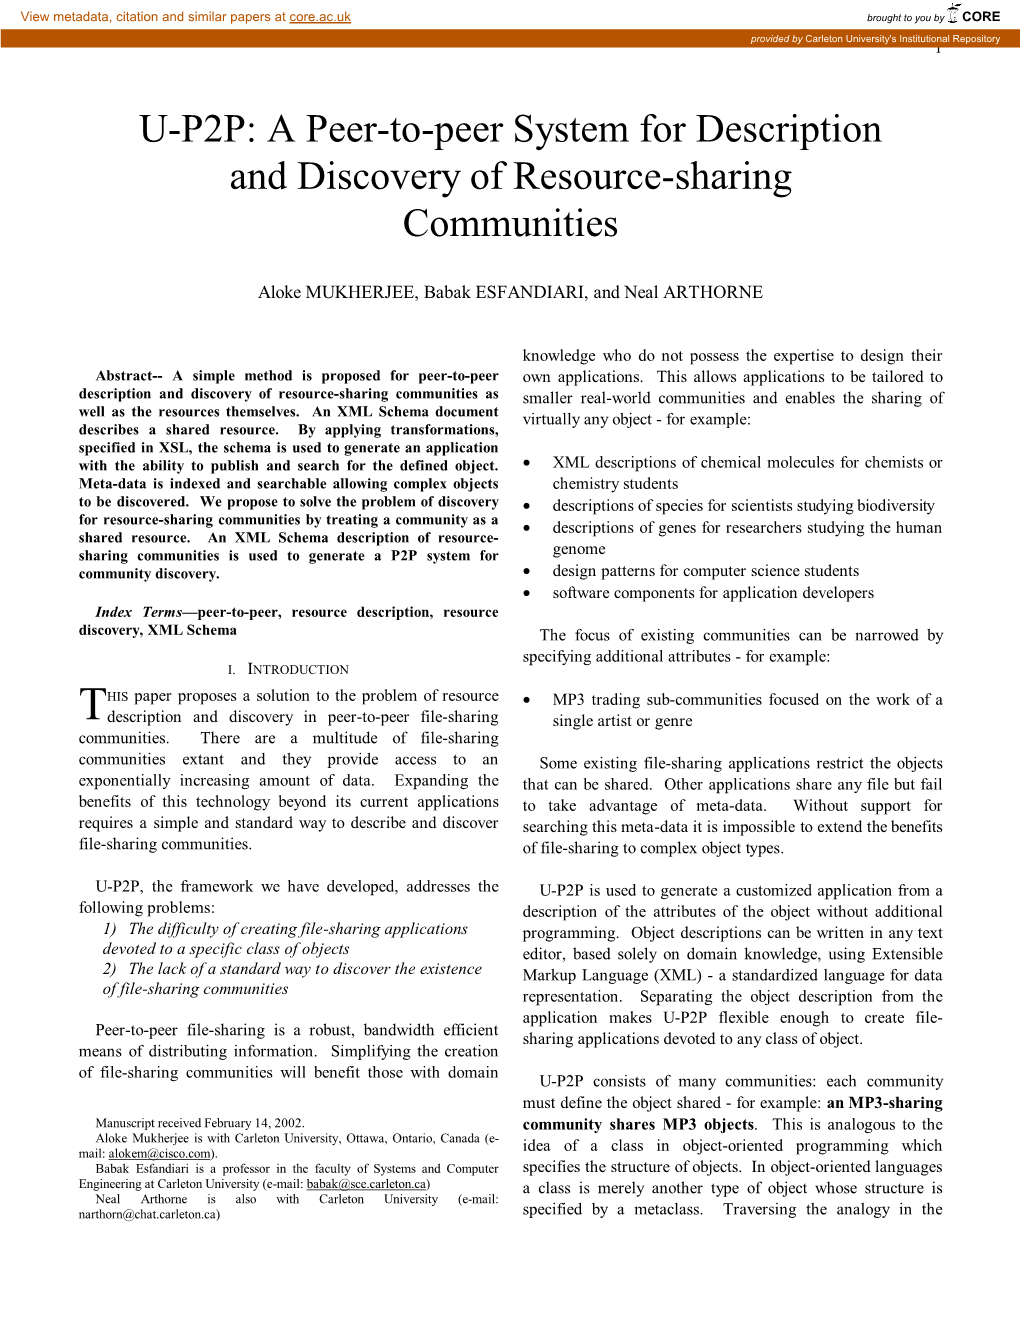 U-P2P: a Peer-To-Peer System for Description and Discovery of Resource-Sharing Communities